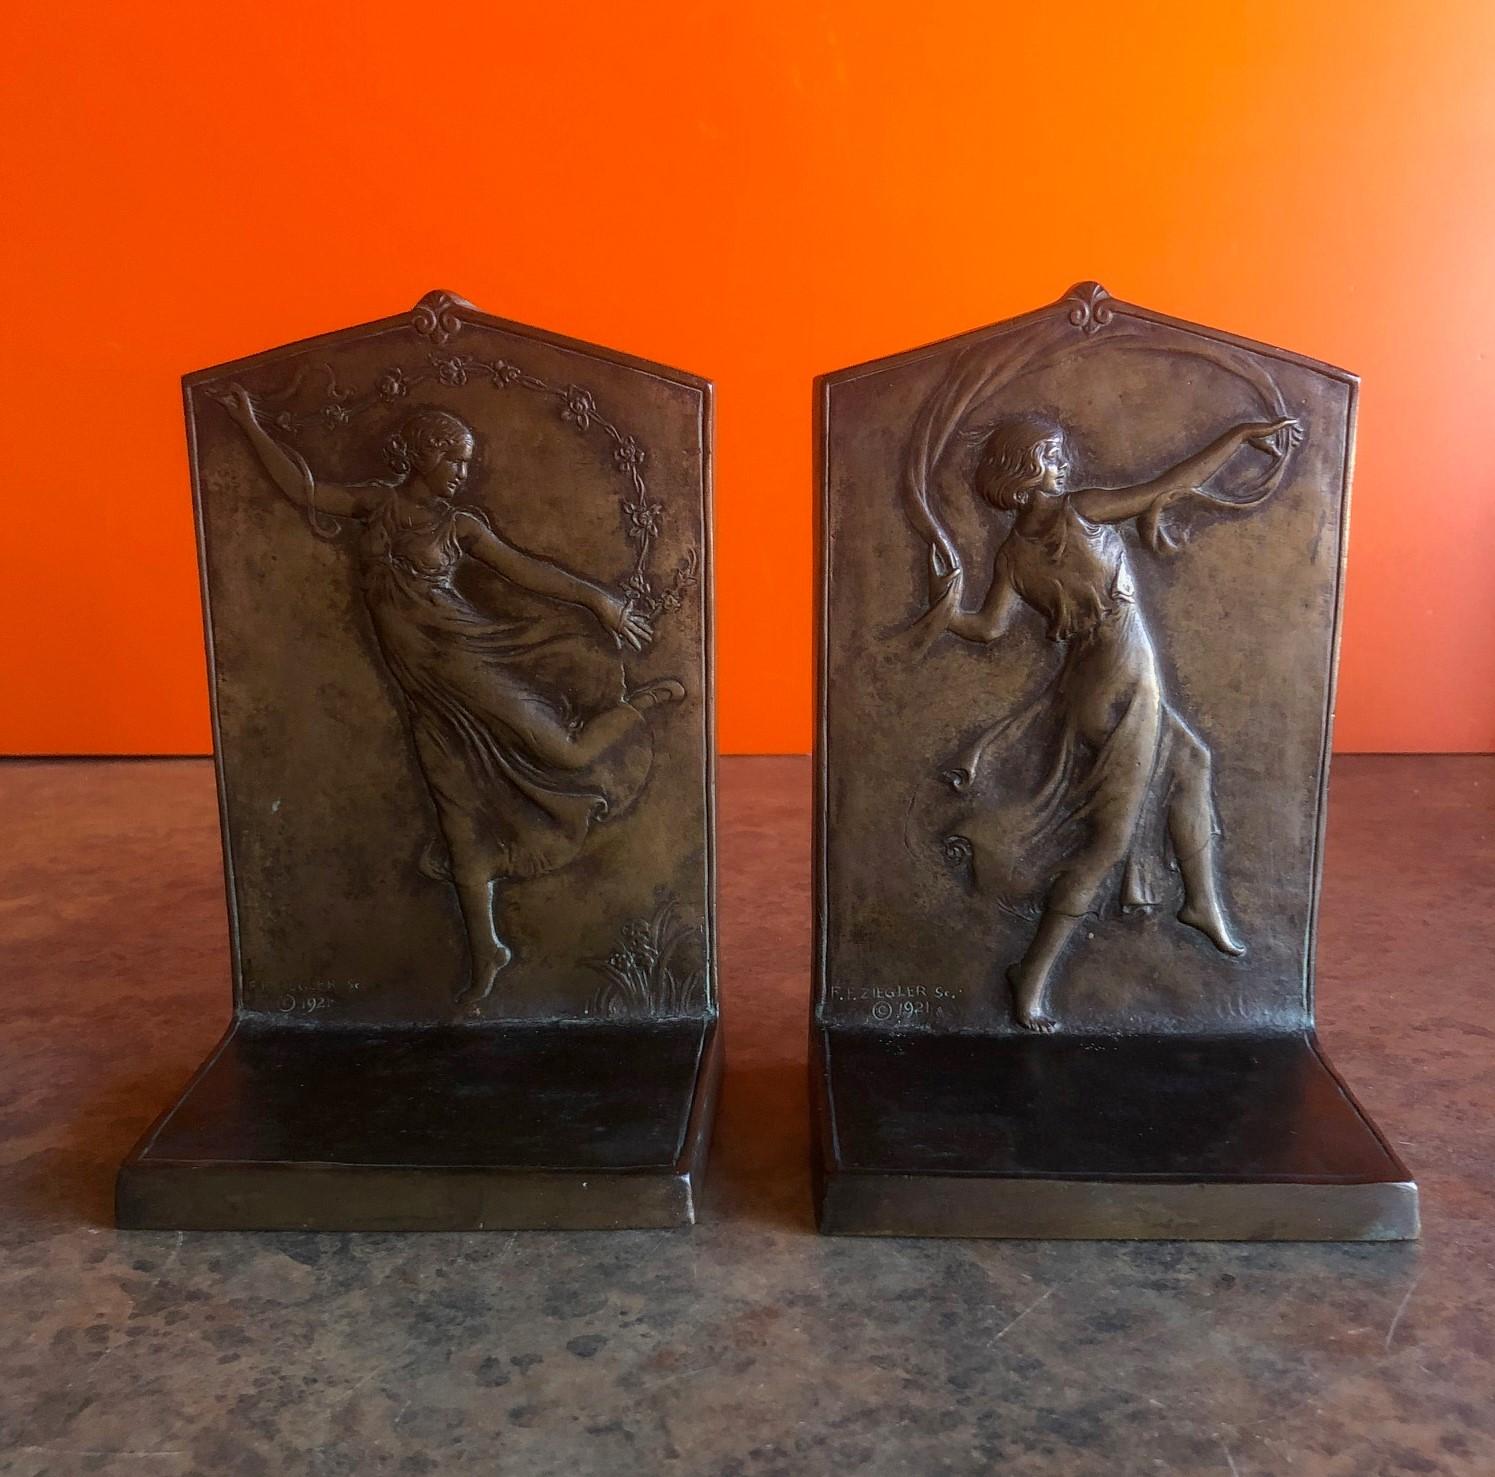 Pair of Bronze Art Nouveau Dancers Bookends by F.F. Ziegler for Gorham Founders In Good Condition For Sale In San Diego, CA